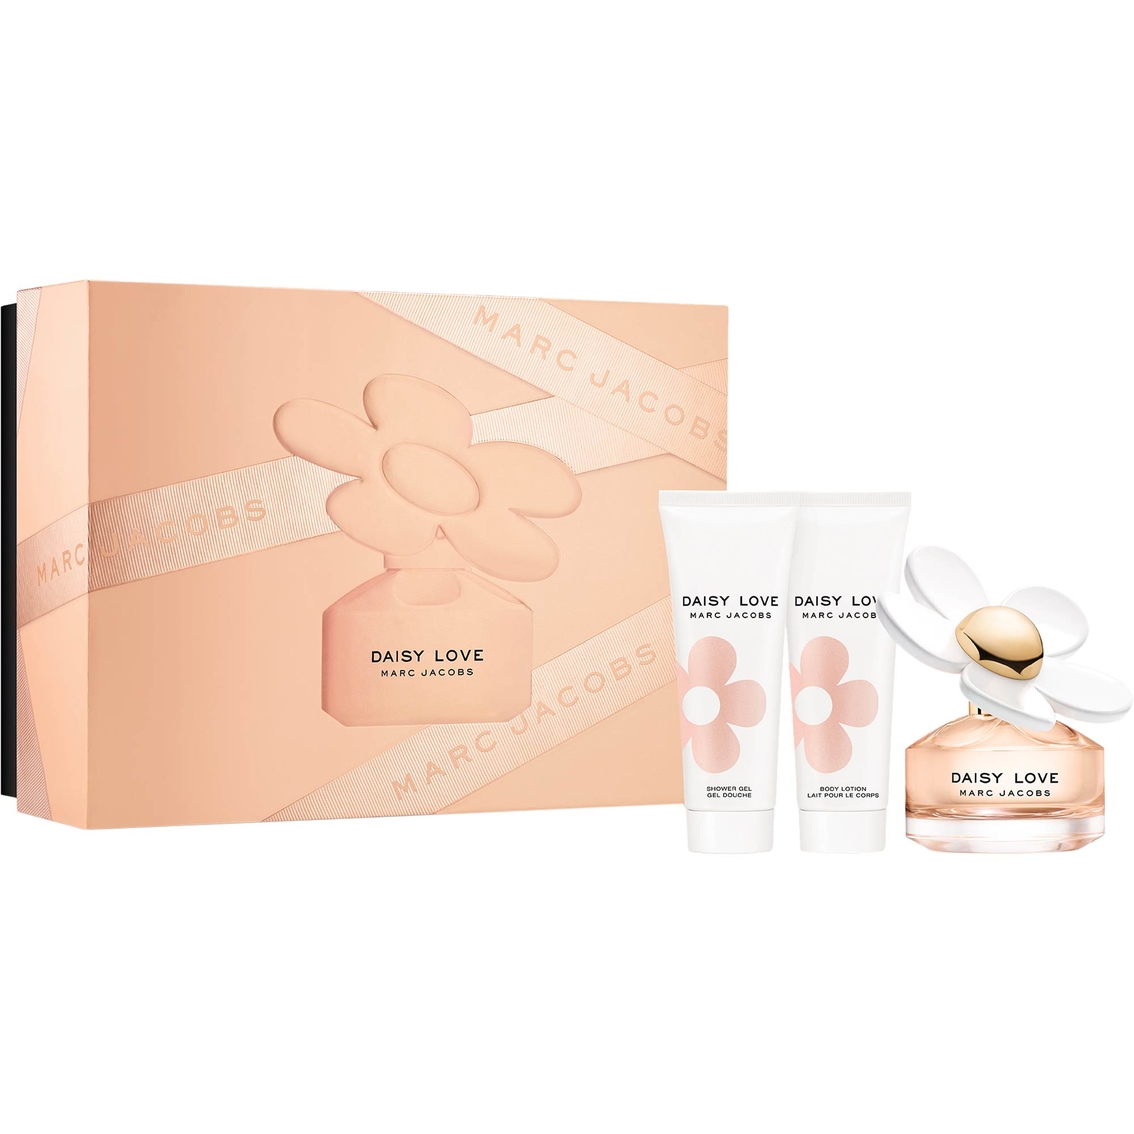 Marc Jacobs Daisy Love Gift Set Gifts Sets For Her Beauty Health | My ...